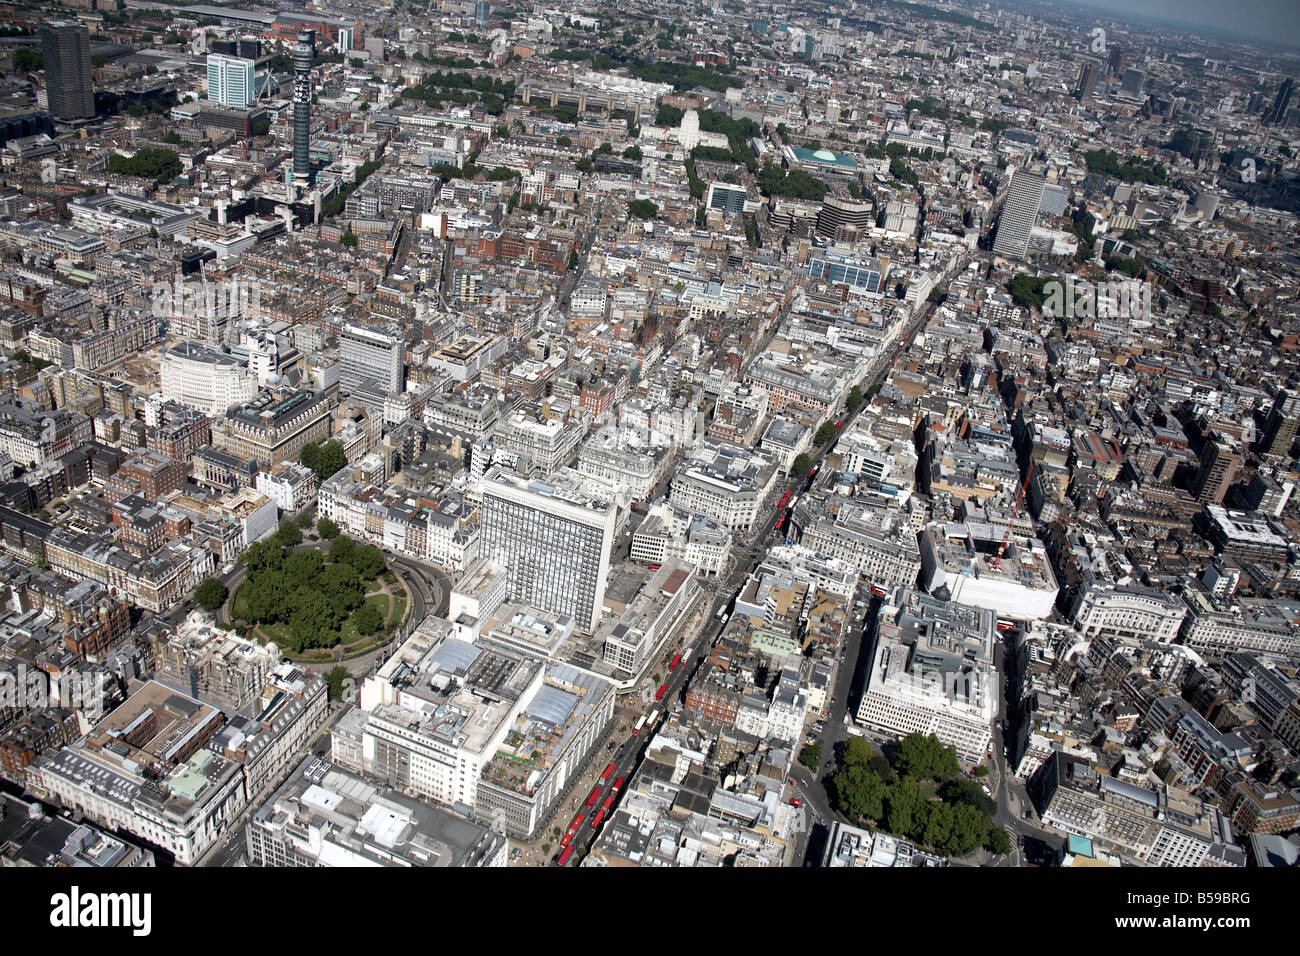 Aerial view north east of inner city buildings tower blocks Cavendish Square Oxford St Oxford Circus Regent St Hanover Square Stock Photo